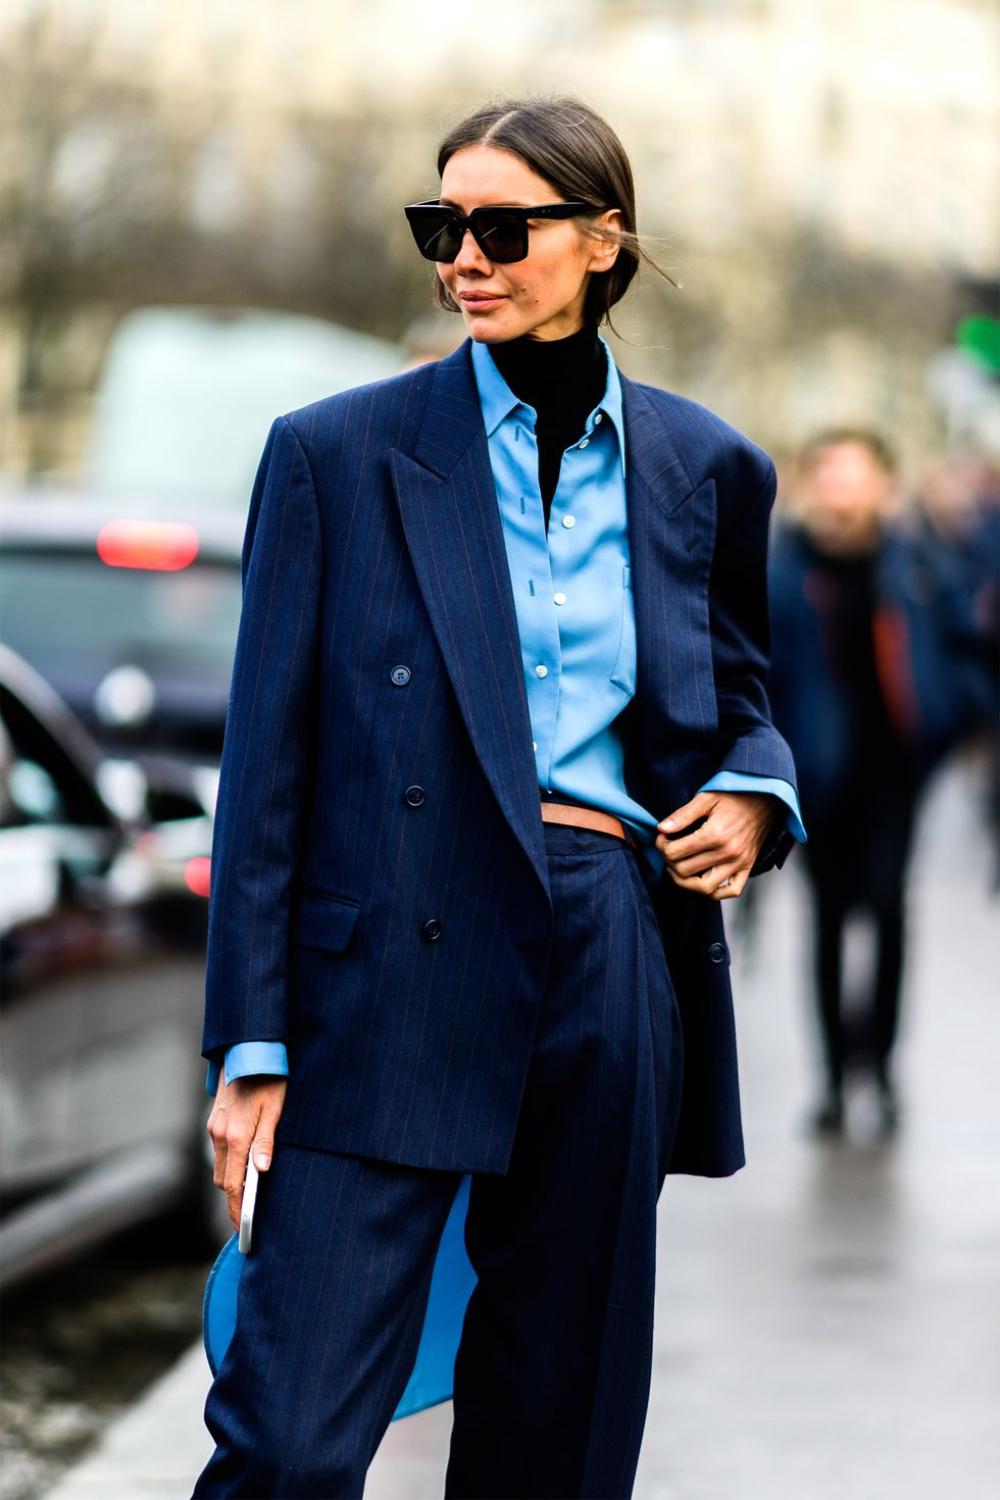 Julie Pelipas in Double-Breasted Navy Striped Pant Suit, Blue Shirt and Black Turtleneck